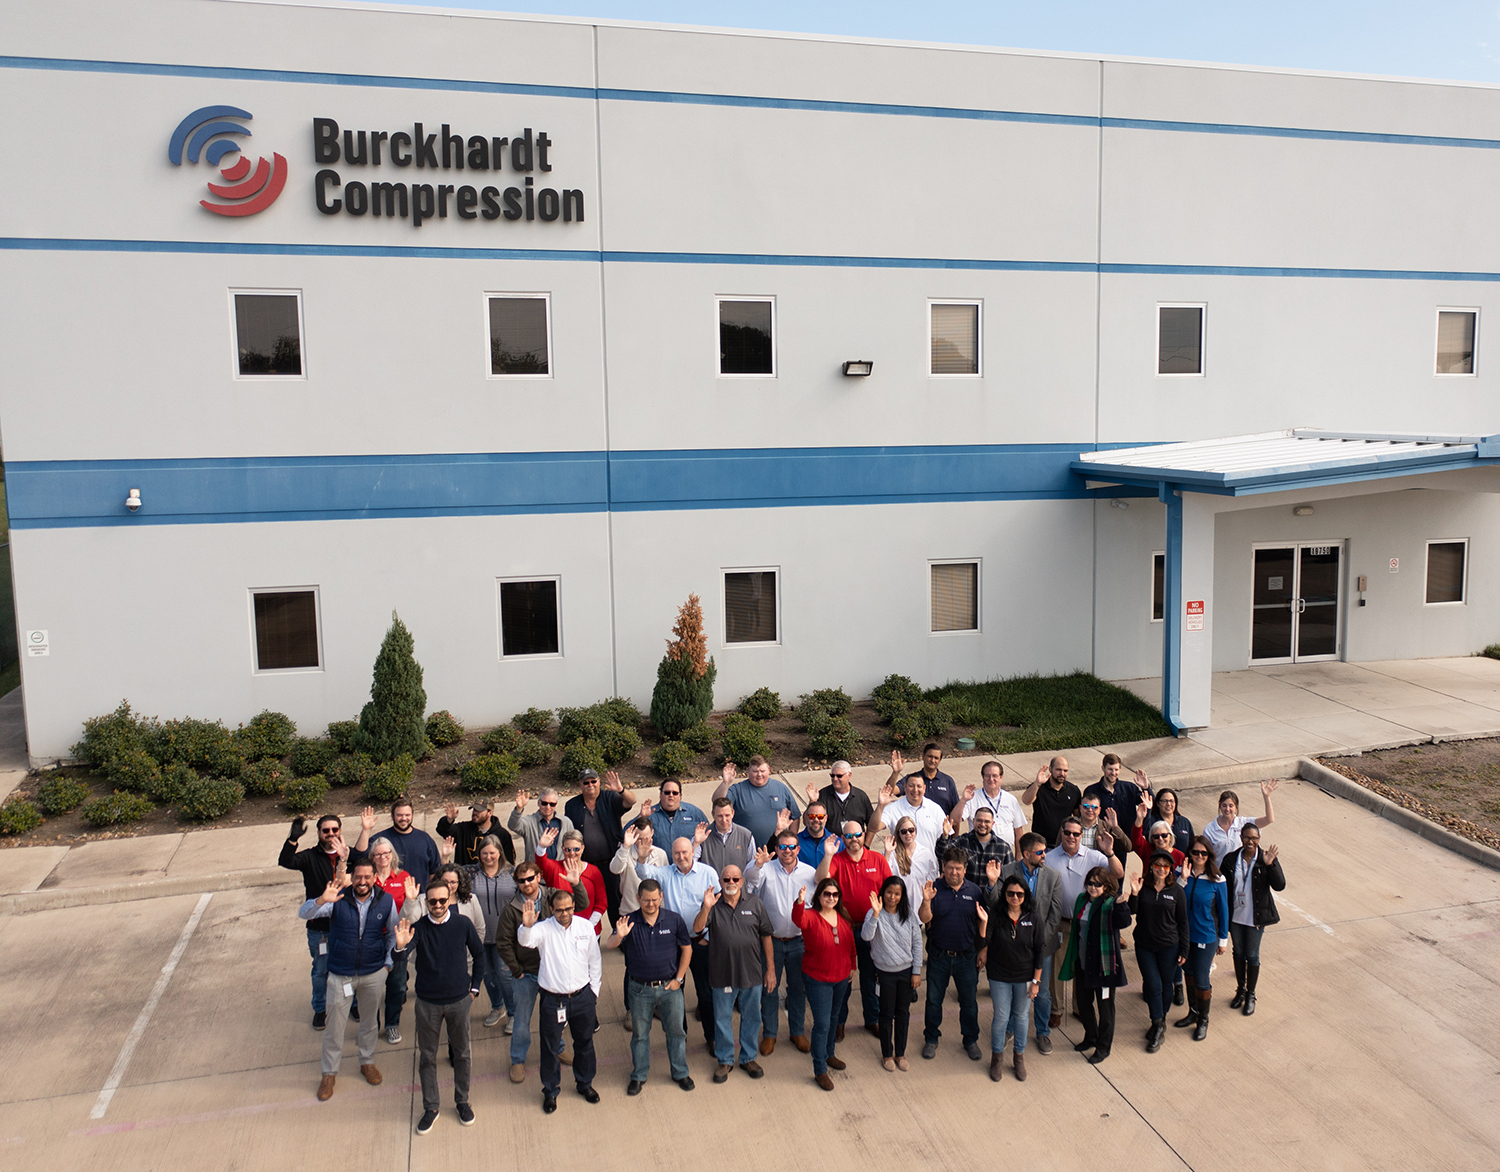 Burckhardt Compression US is qualified and equipped to deliver a comprehensive range of services to customers.